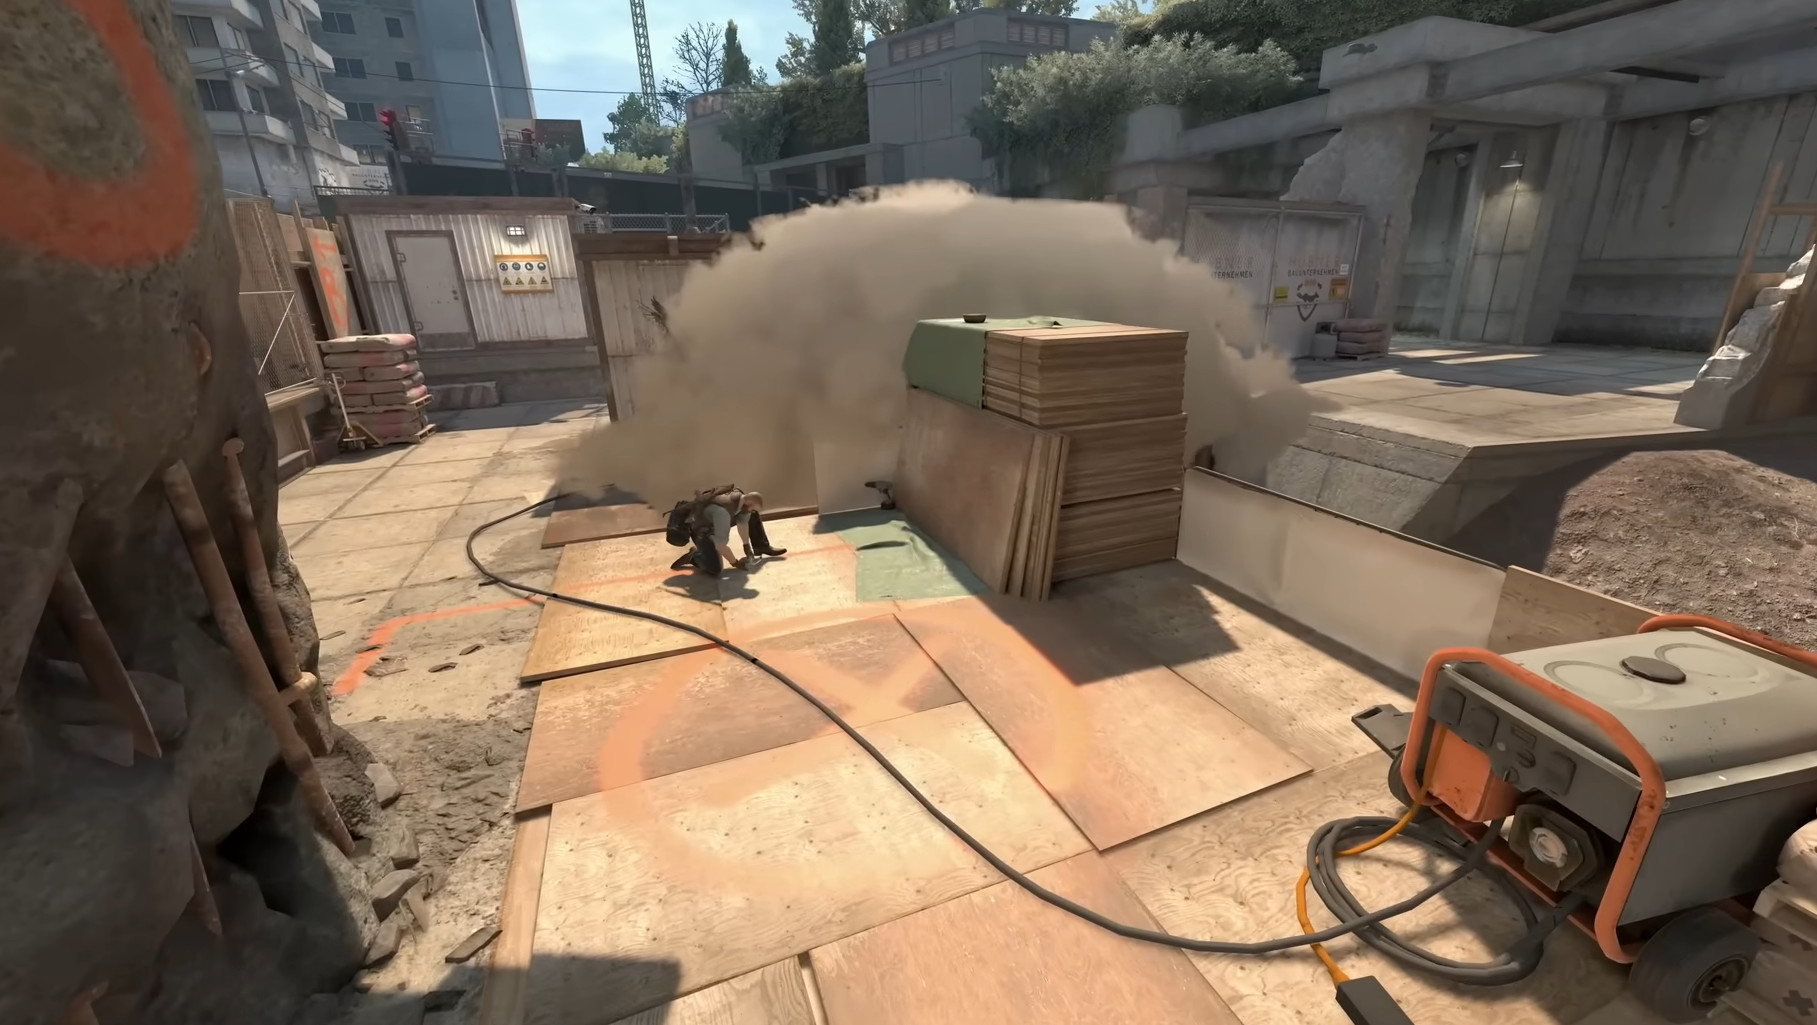 Counter Strike 2: release date, skins, system requirements